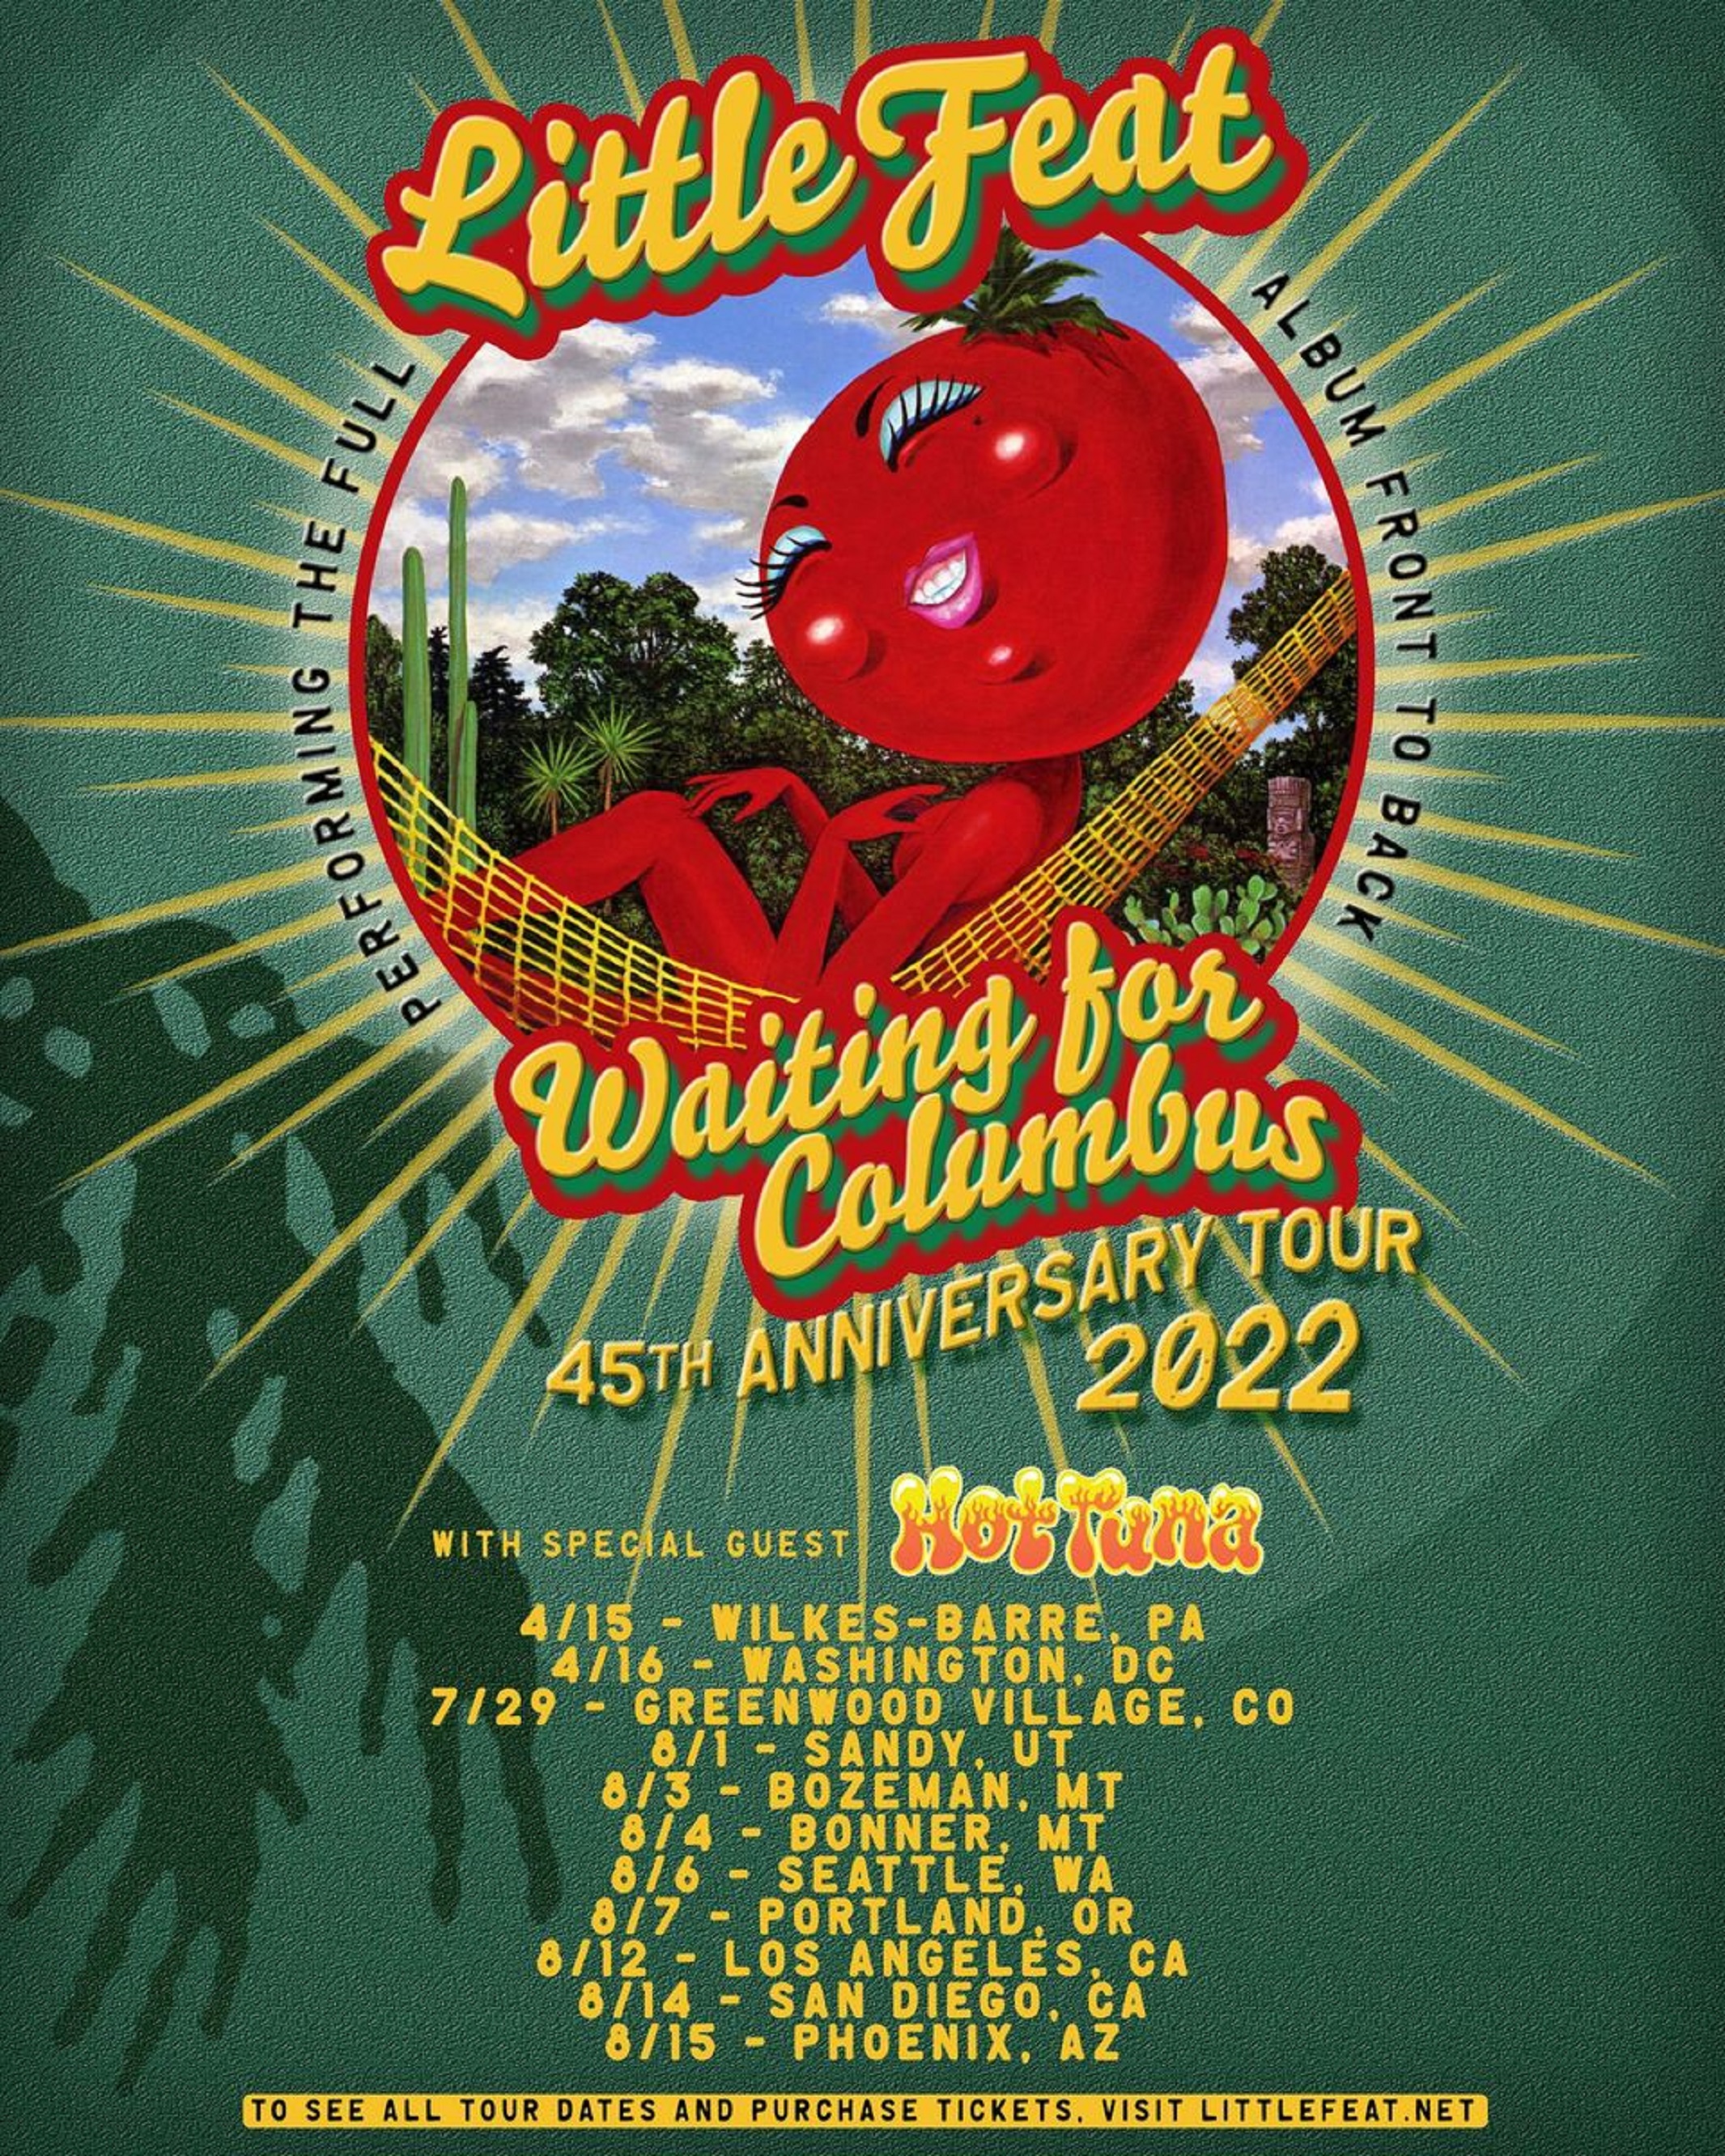 Hot Tuna On Tour w/ Little Feat – Come out for the music & the joy!